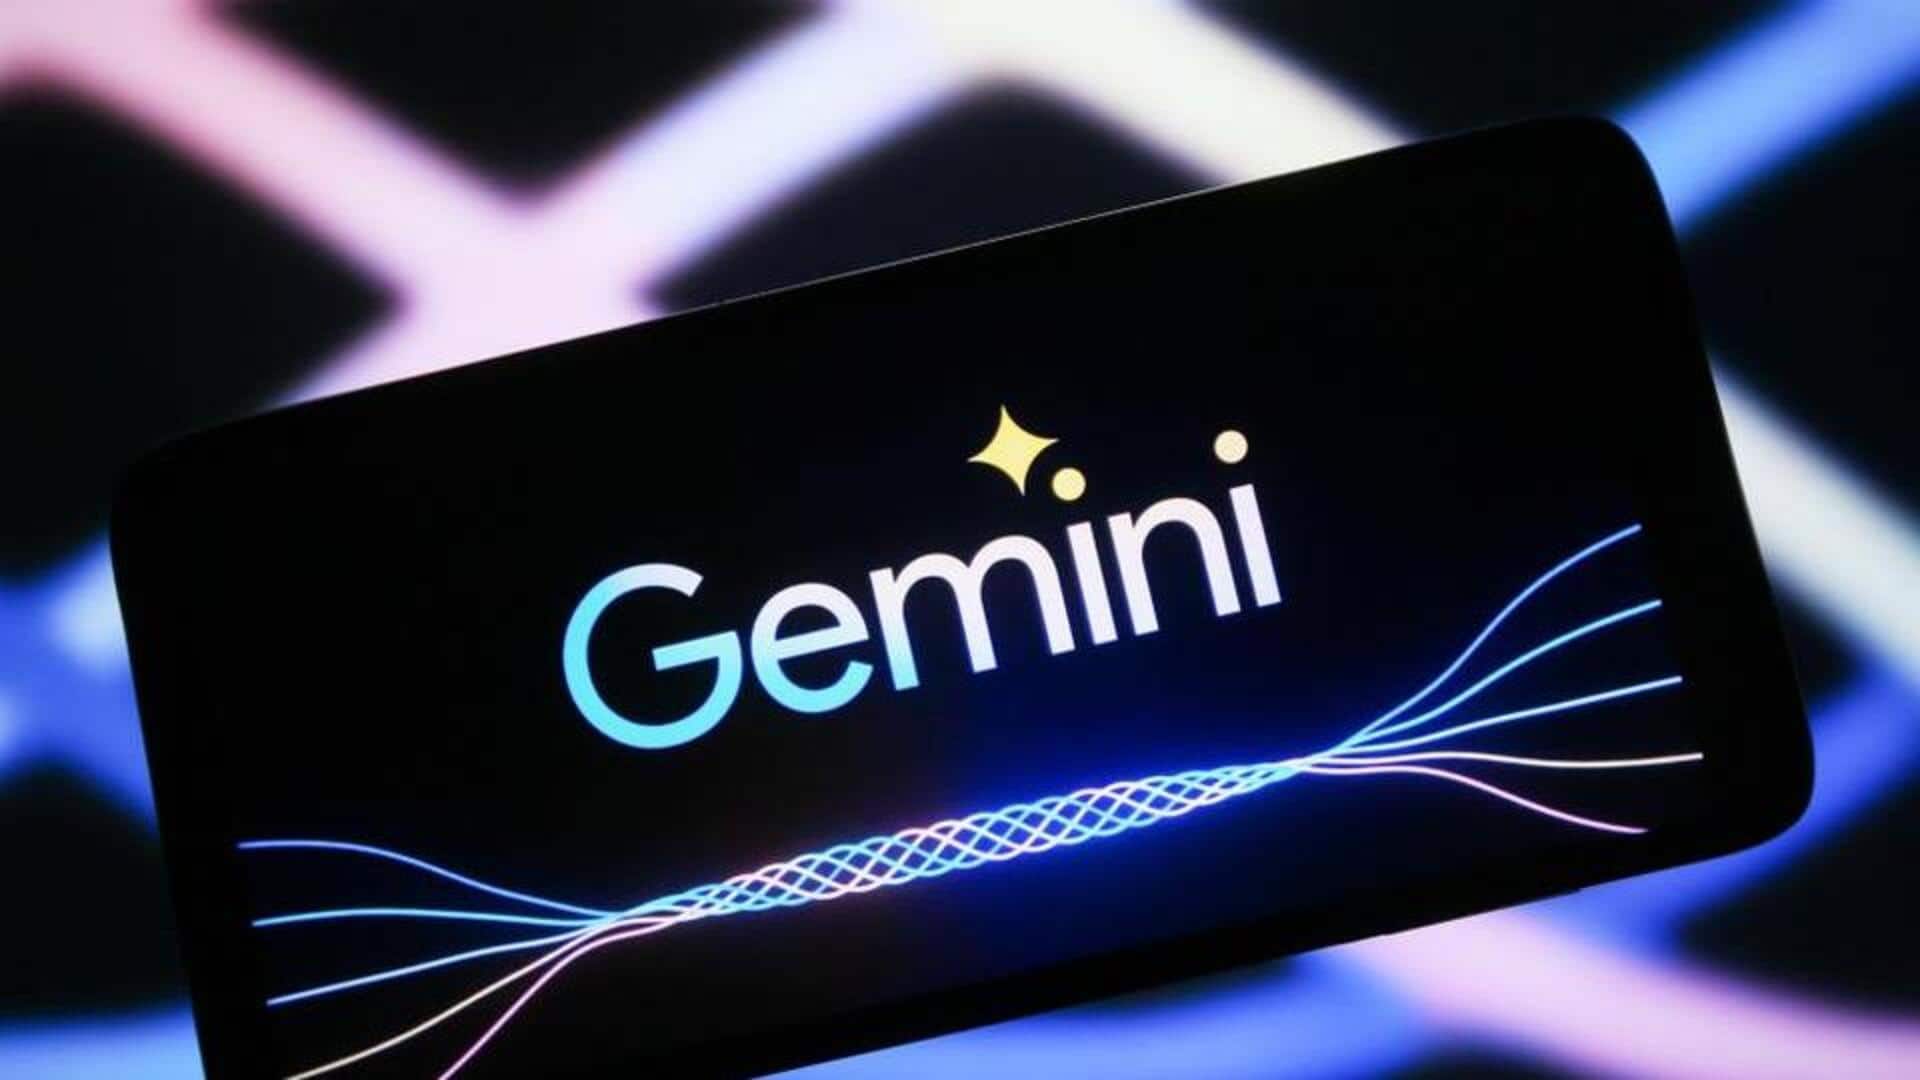 After backlash, Google suspends Gemini's AI image generation of people